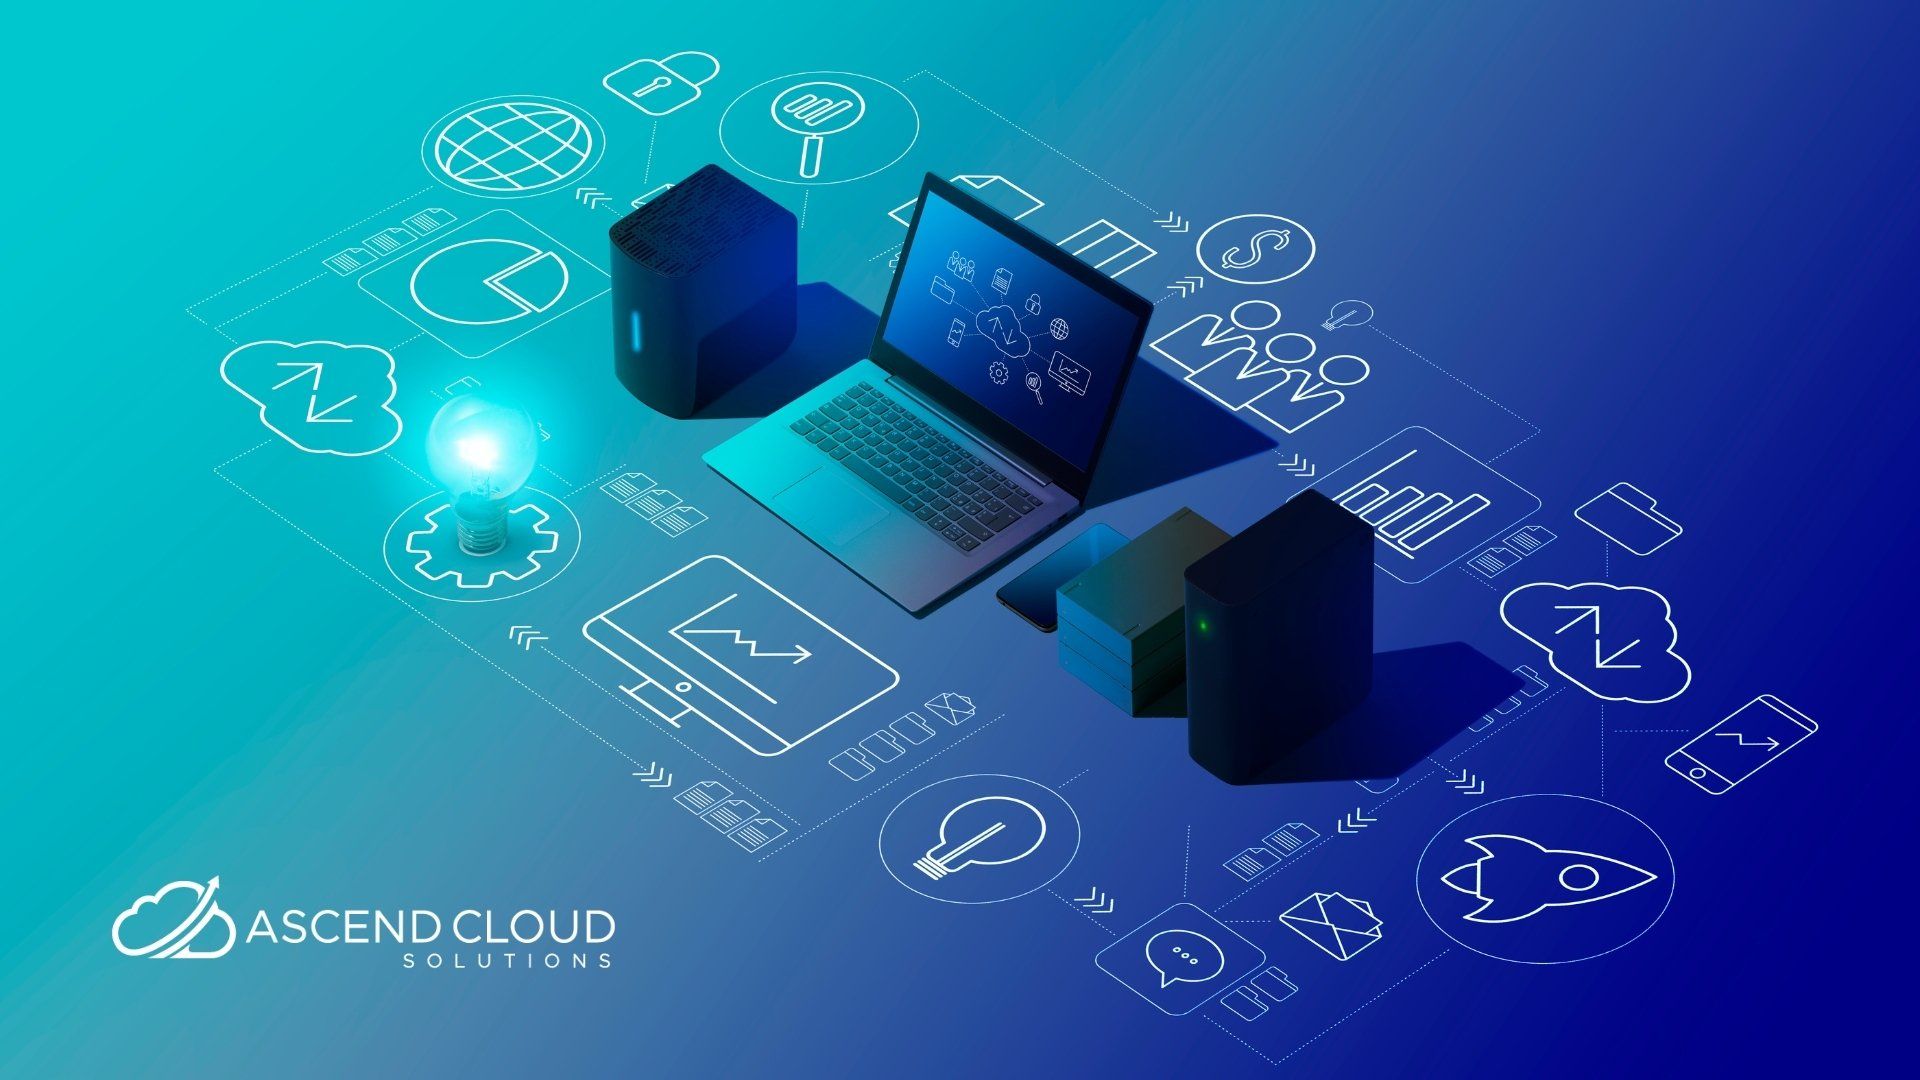 The origins of cloud computing go back further than you might think. Learn about the forebears of the modern cloud in our cloud computing history guide.